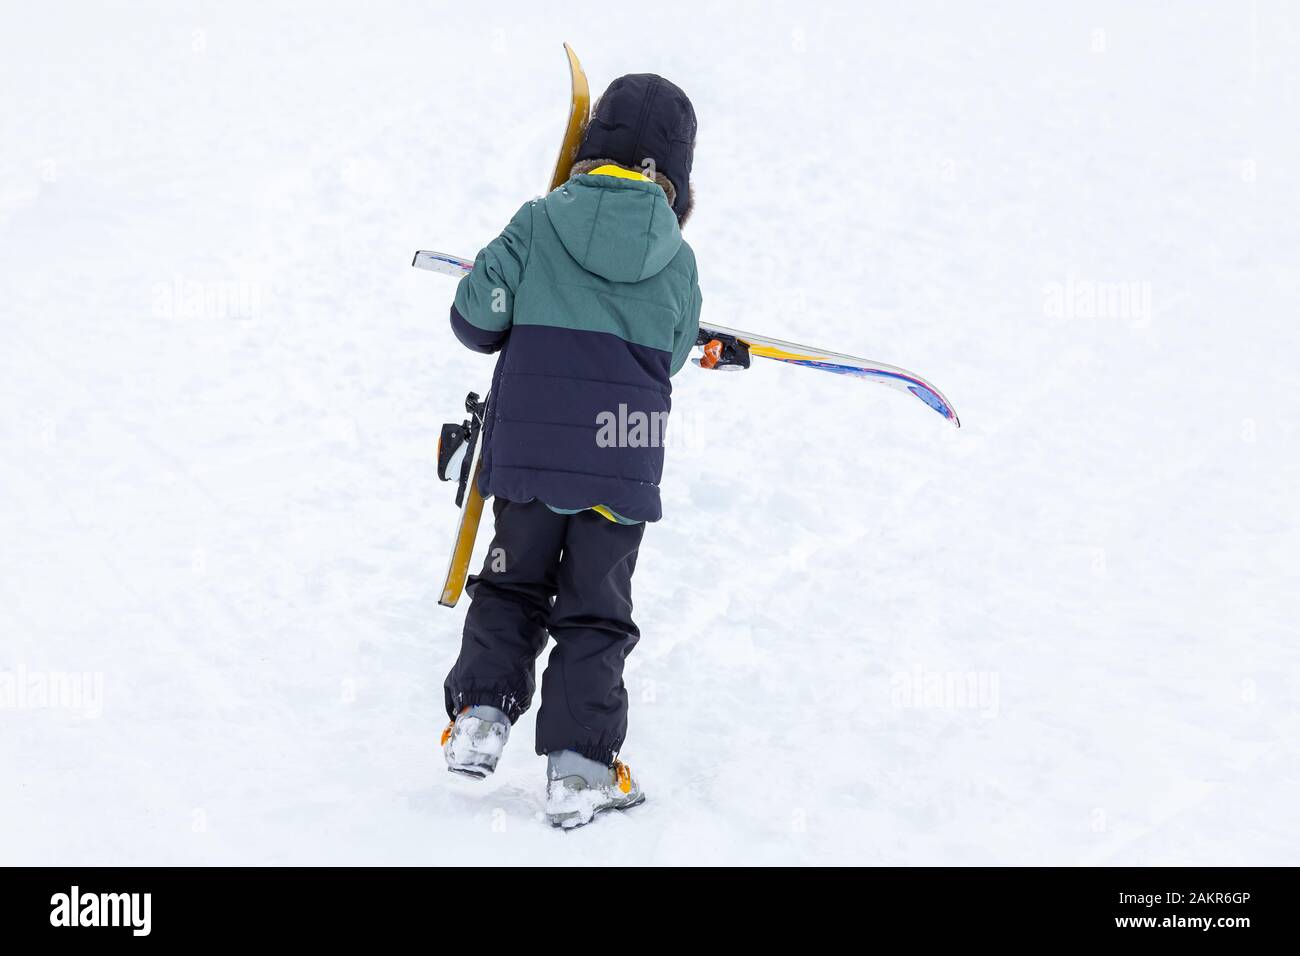 Snowboarder goes uphill with snowboard in hands. Backcountry skiing concept  Stock Photo - Alamy